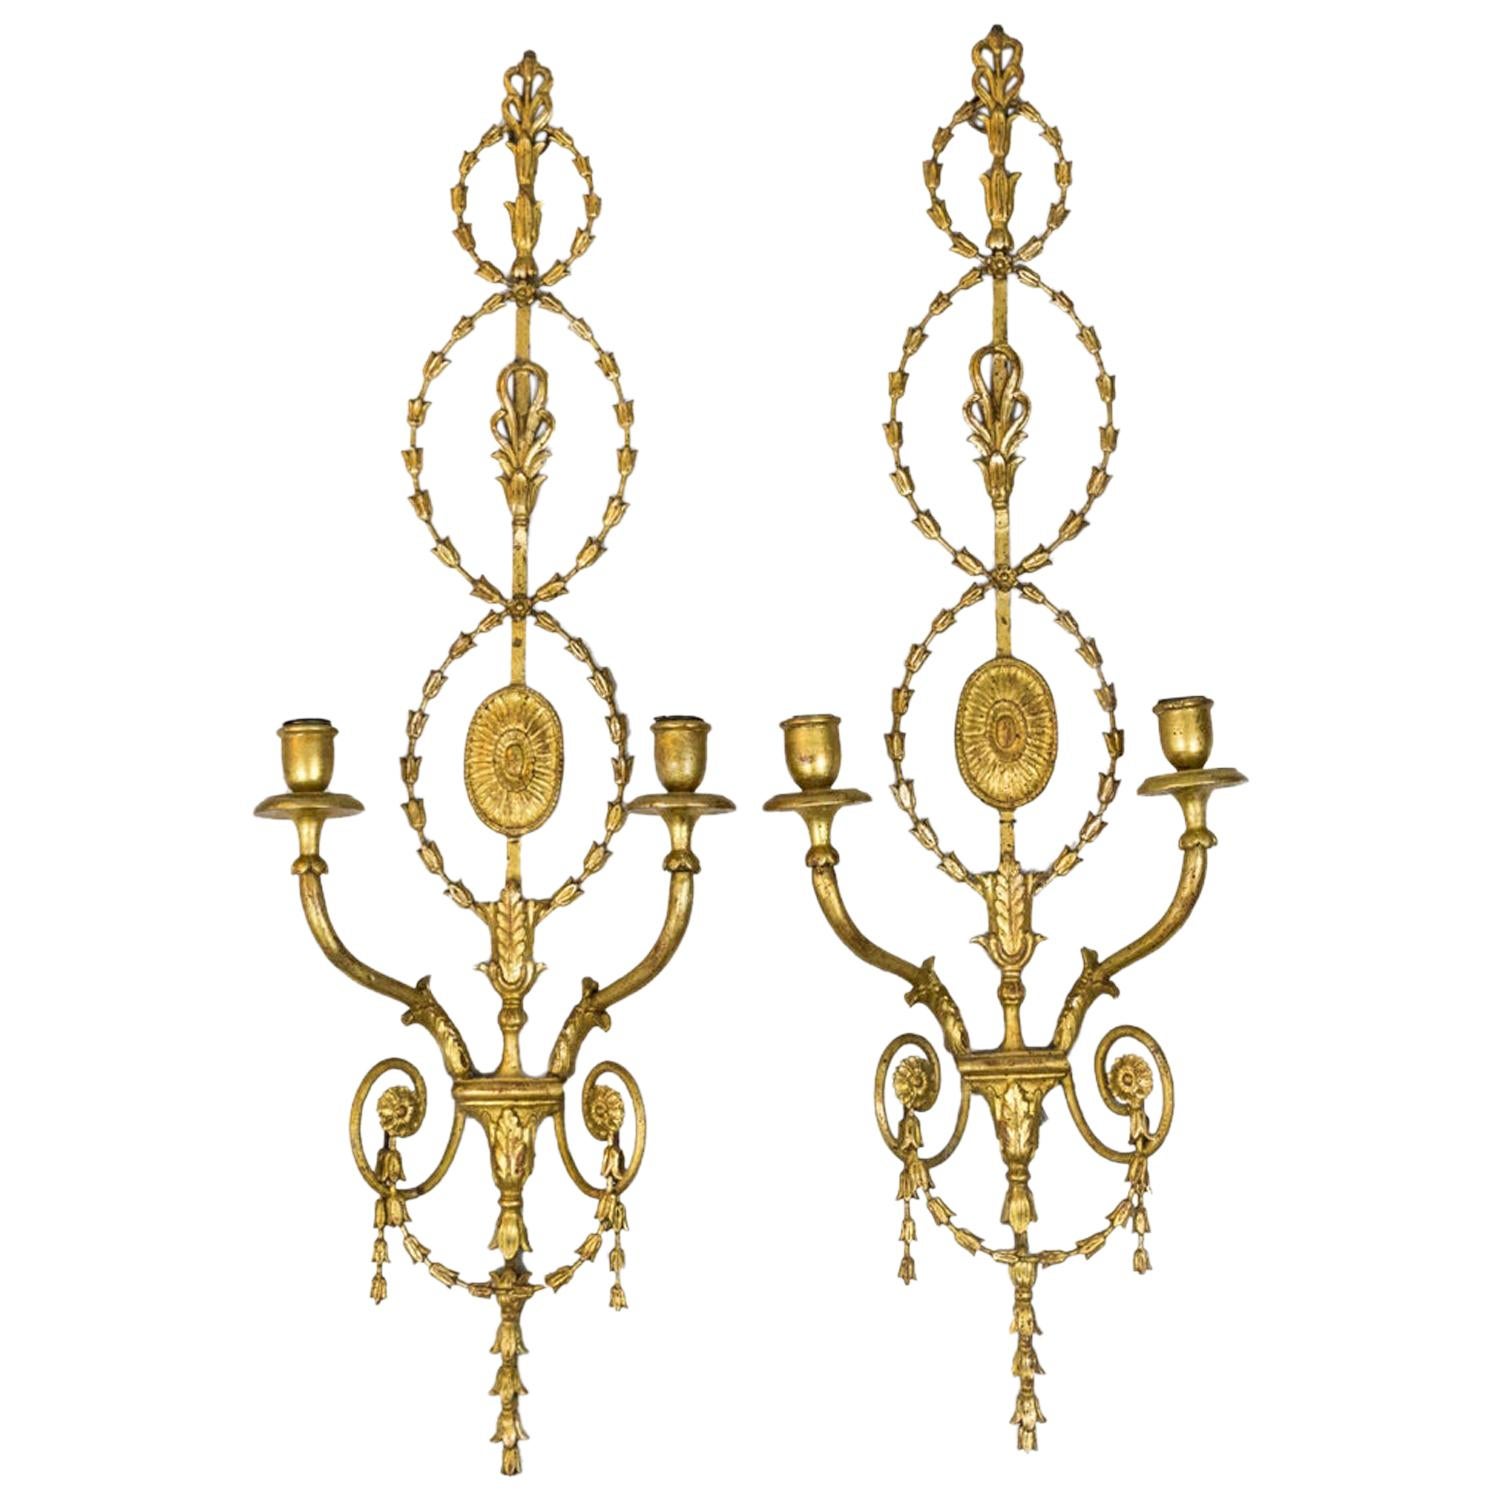 Pair of Adam Style Wall Sconces in Gilt Stucco and Metal, 1950s